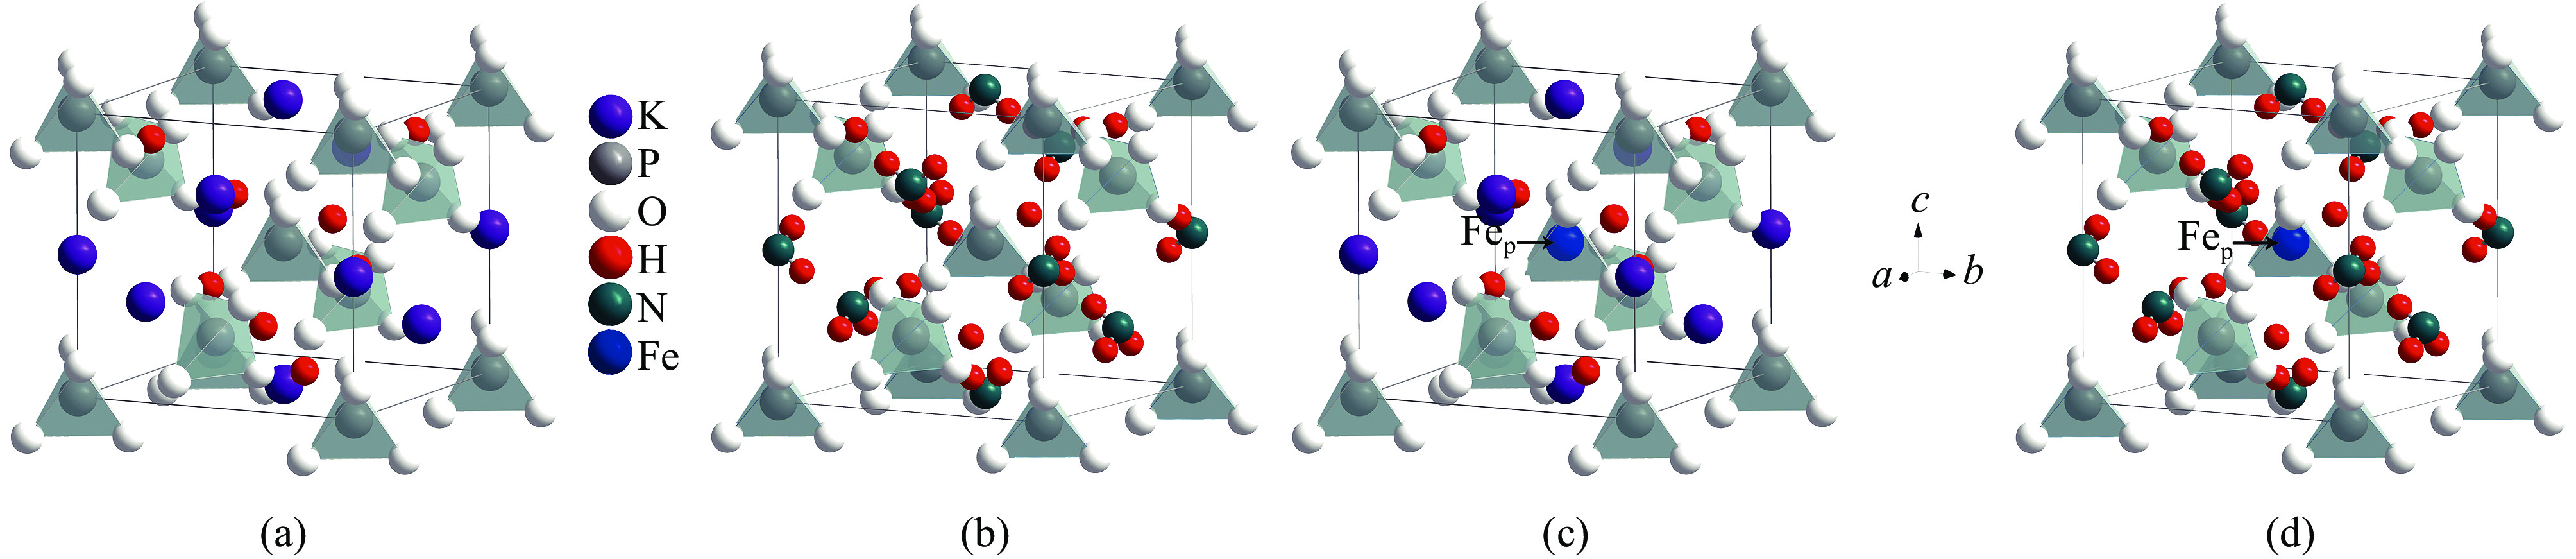 Crystal structures of the pristine KDP (a) and ADP (b) as well as the crystals with FeP (c, d) defects